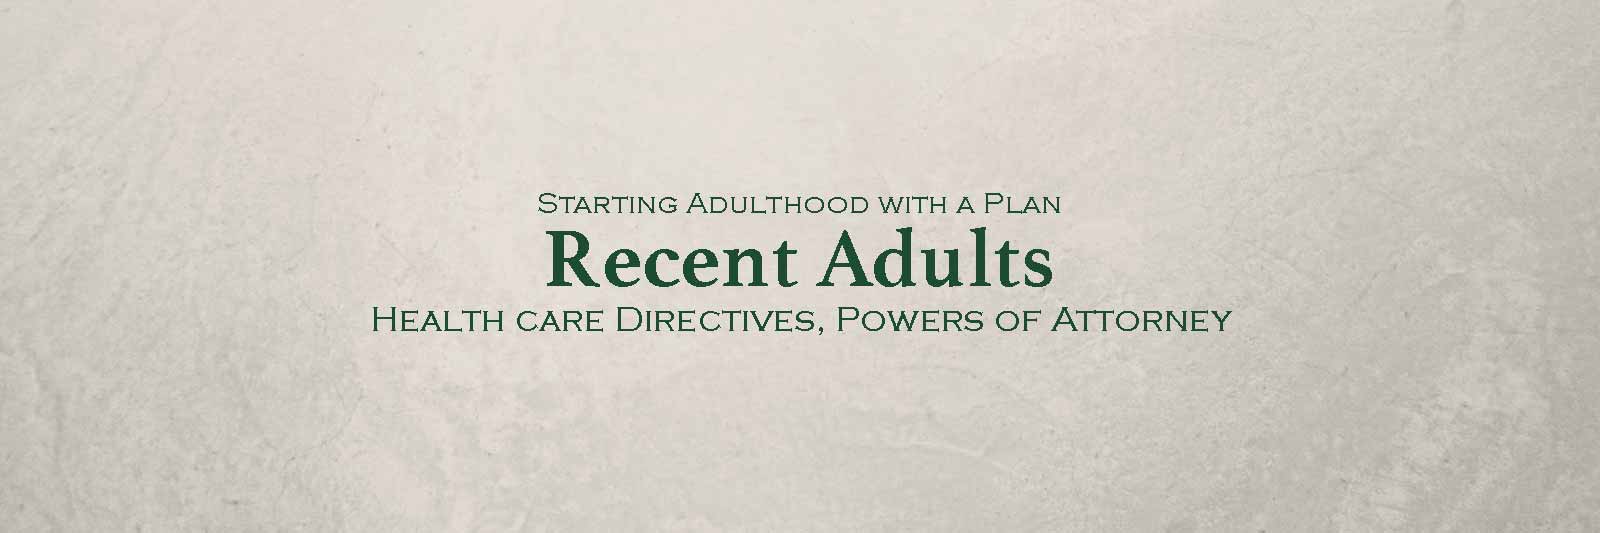 Starting Adulthood with a Plan: Recent Adults; Health care directives, powers of attorney